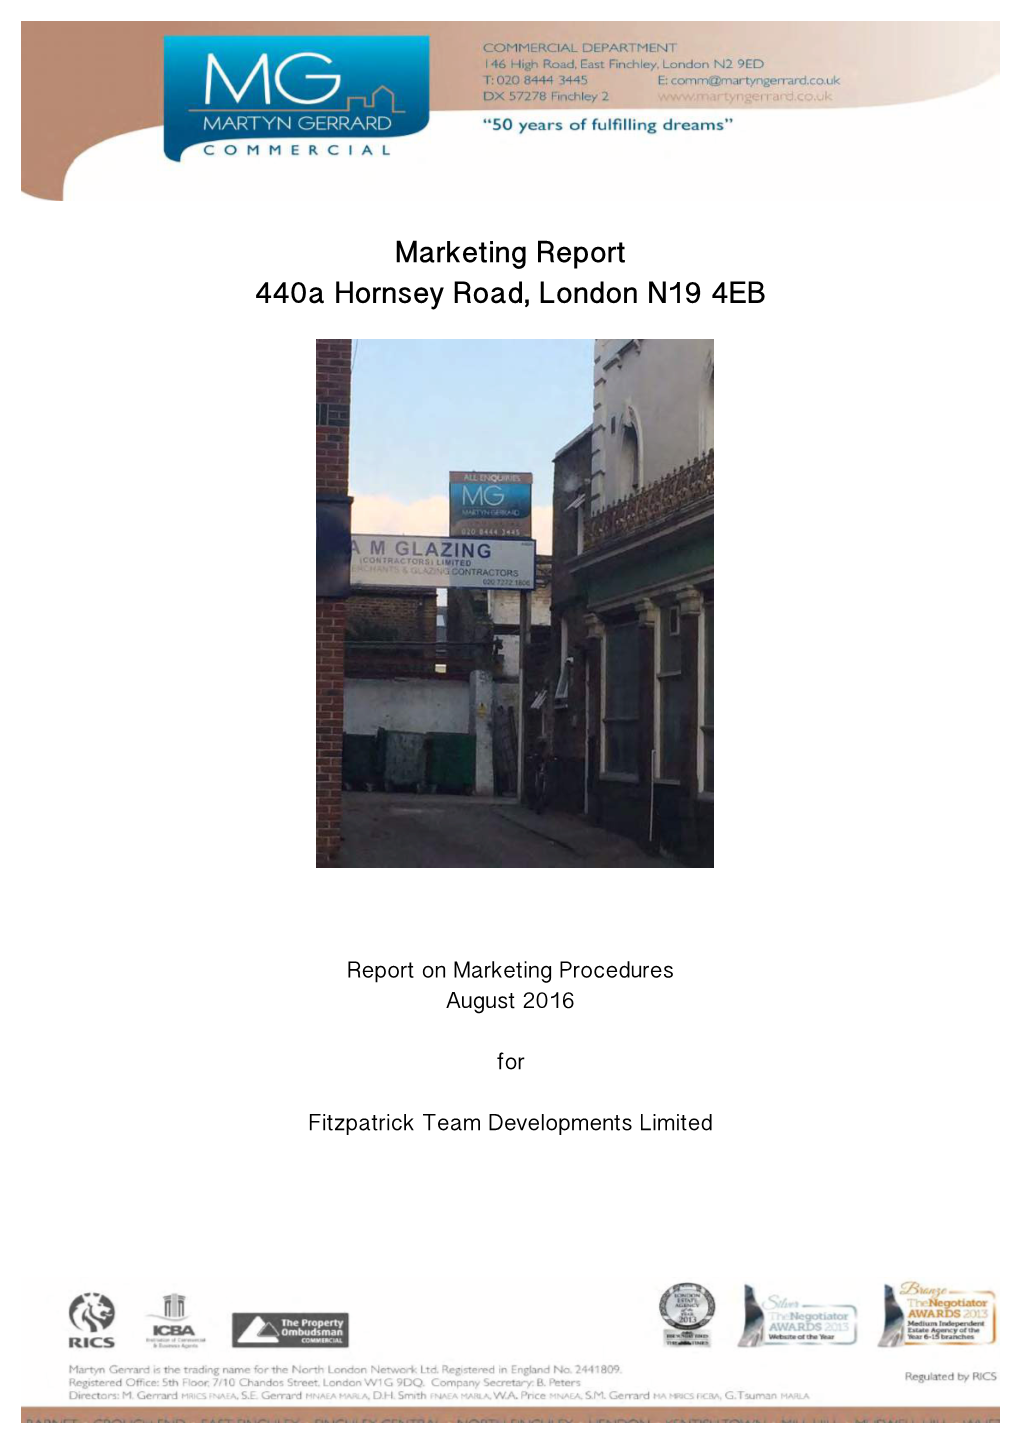 Marketing Report 440A Hornsey Road, London N19 4EB